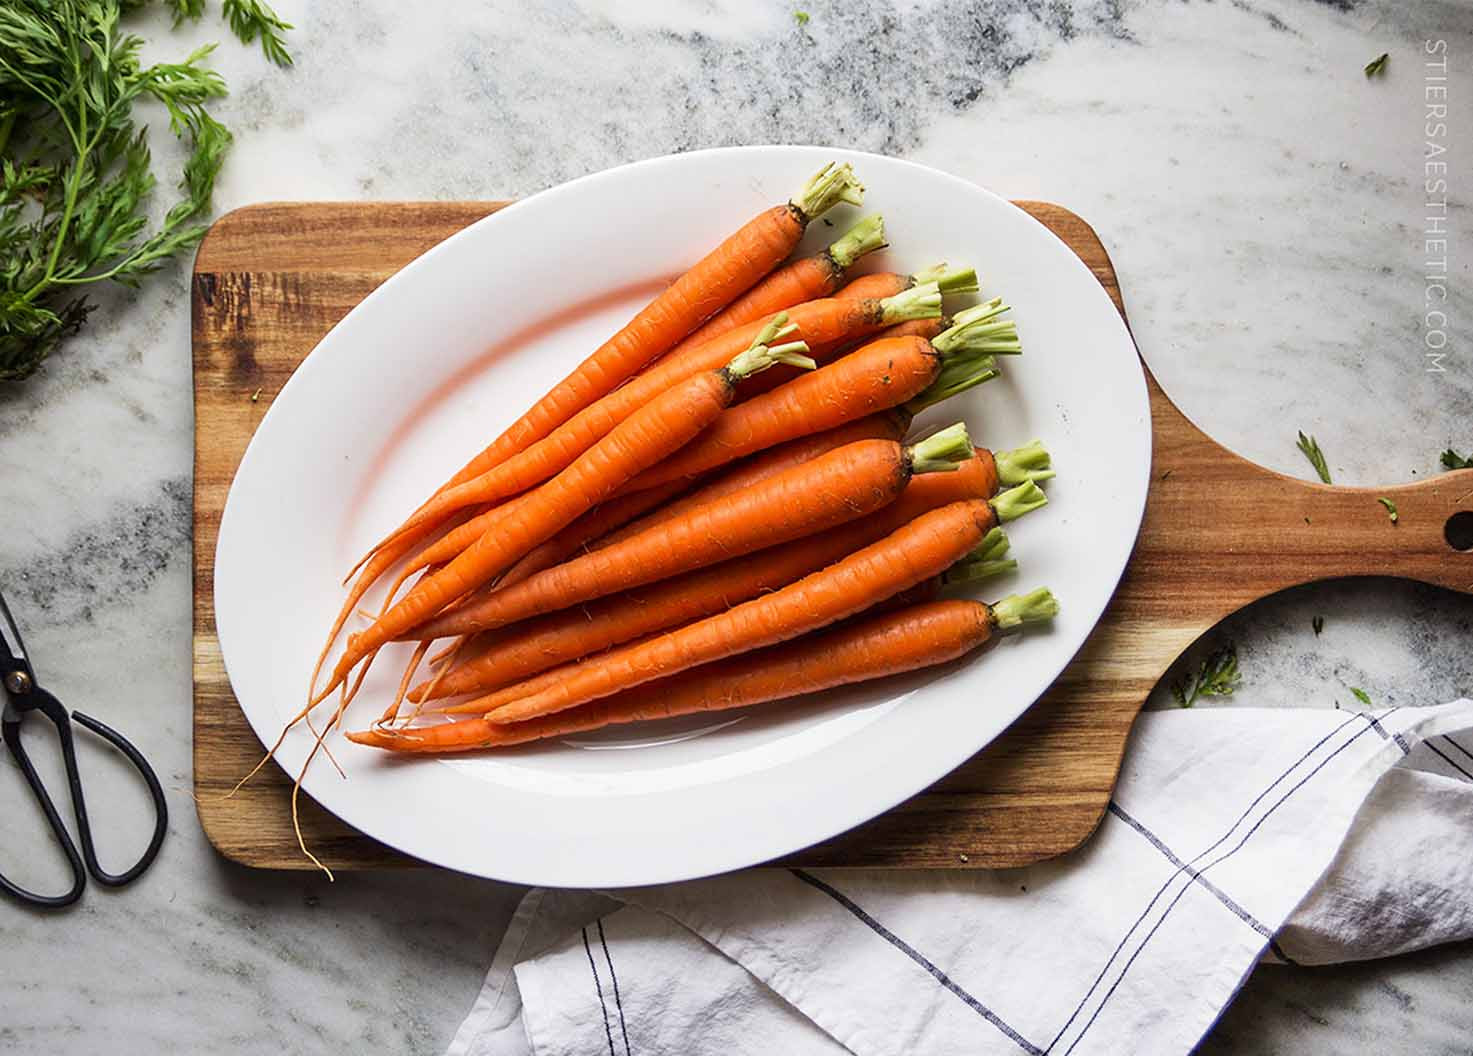 Carrots for Glowing Skin